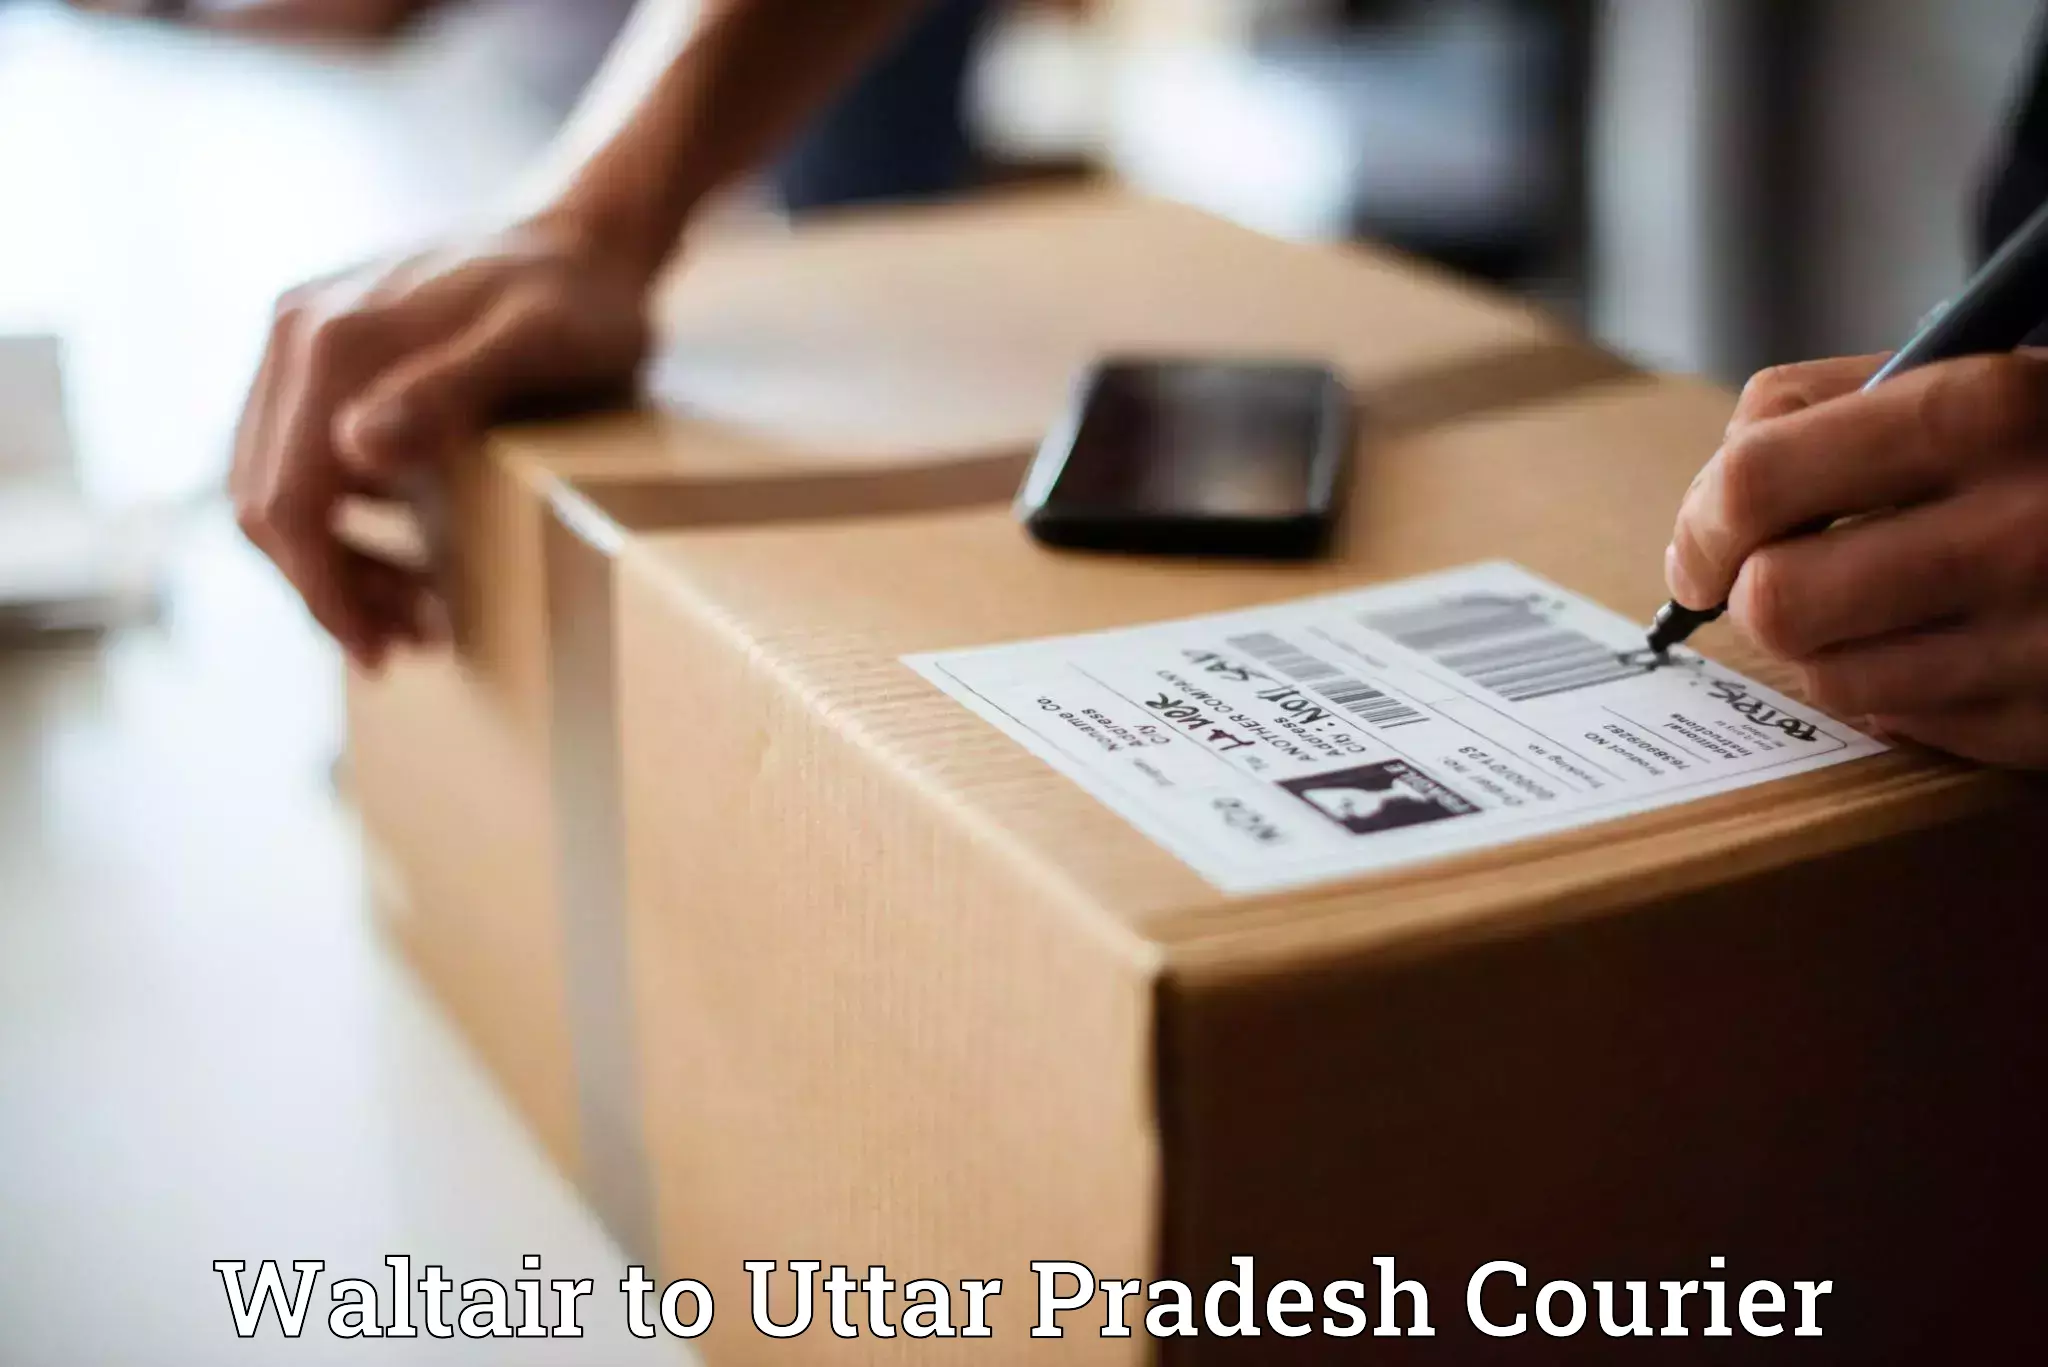 Return courier service Waltair to Kanpur